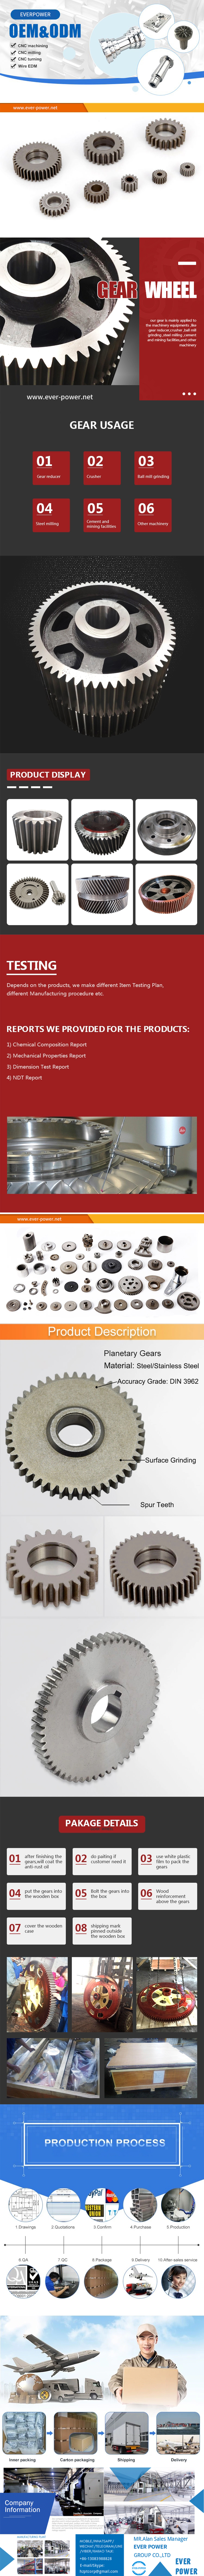   in Udaipur India  sales   price   shop   near me   near me shop   factory   supplier Carbon and Stainless Steel Roller Chain Sprocket Gear manufacturer   best   Cost   Custom   Cheap   wholesaler 